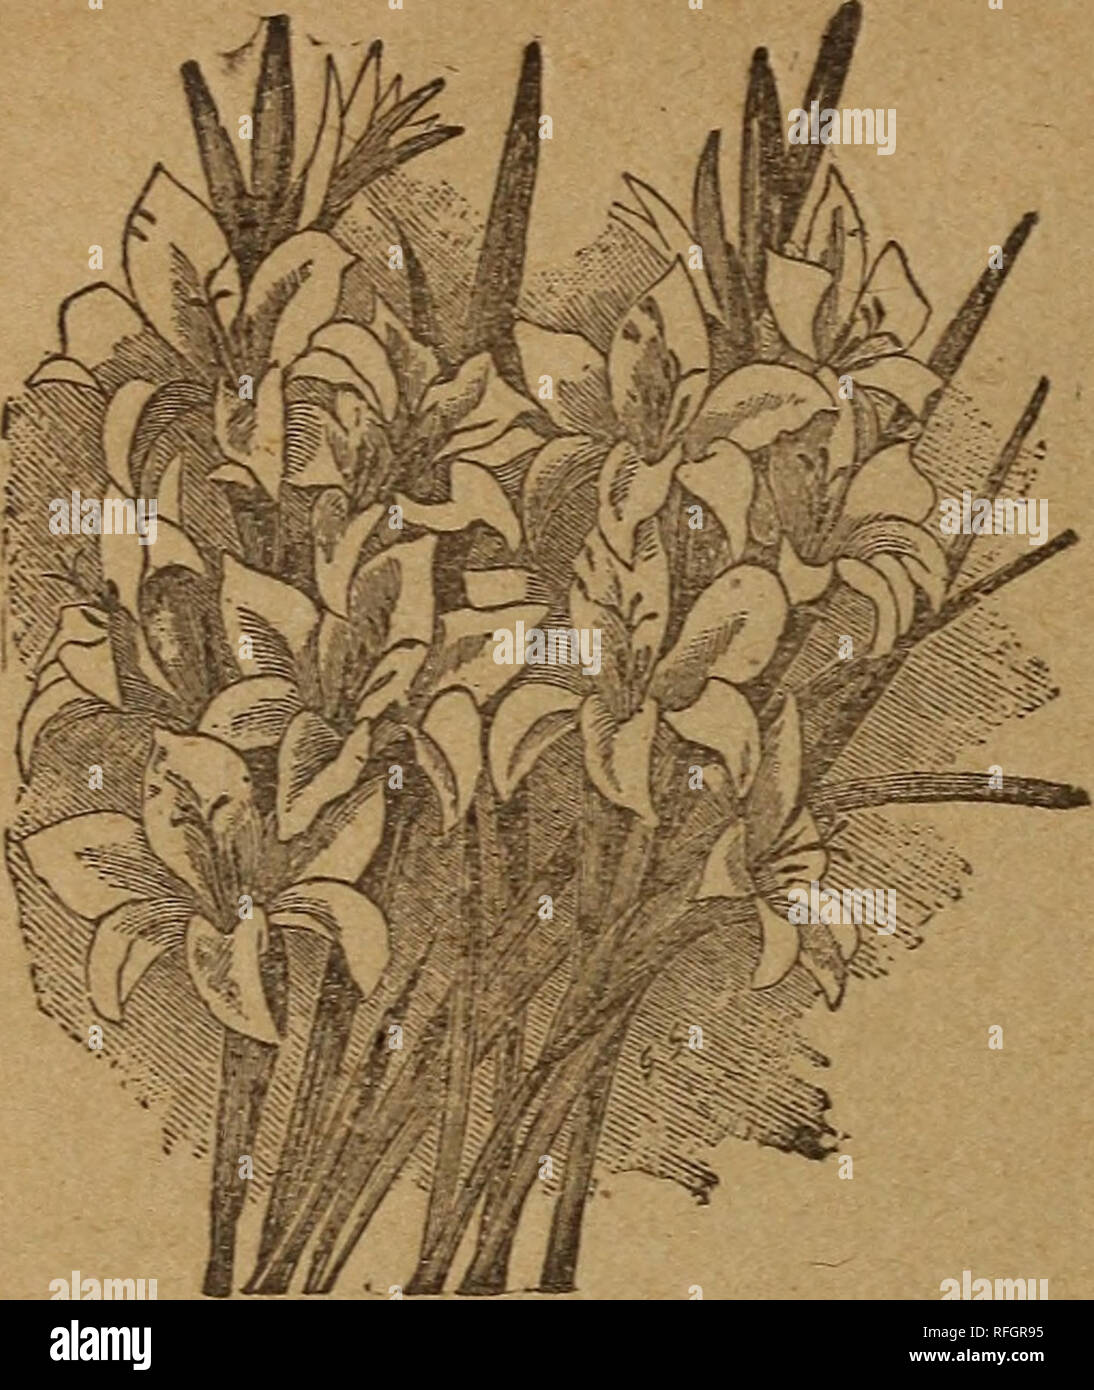 . Park's illustrated list of hardy bulbs for 1900. Nursery stock Pennsylvania Catalogs; Flowers Seeds Catalogs; Bulbs (Plants) Catalogs. GLADIOLUS, THE BRIDE. A beautiful, early-blooming Gladiolus with pure white flowers. Unlike the common Gladiolus they are suitable for growing in pots, and will bloom well dur- ing winter. Per dozen 40 cents, each 4 cents. Colvilli rubra, similar to The Bride, but different in color, 40 cents per dozen, 4 cents each. GALTONIA CANDICANS. This is a near relative of the Hyacinth, and was first named Hyacinthus, but was afterward changed to Galtonia. It grows two Stock Photo